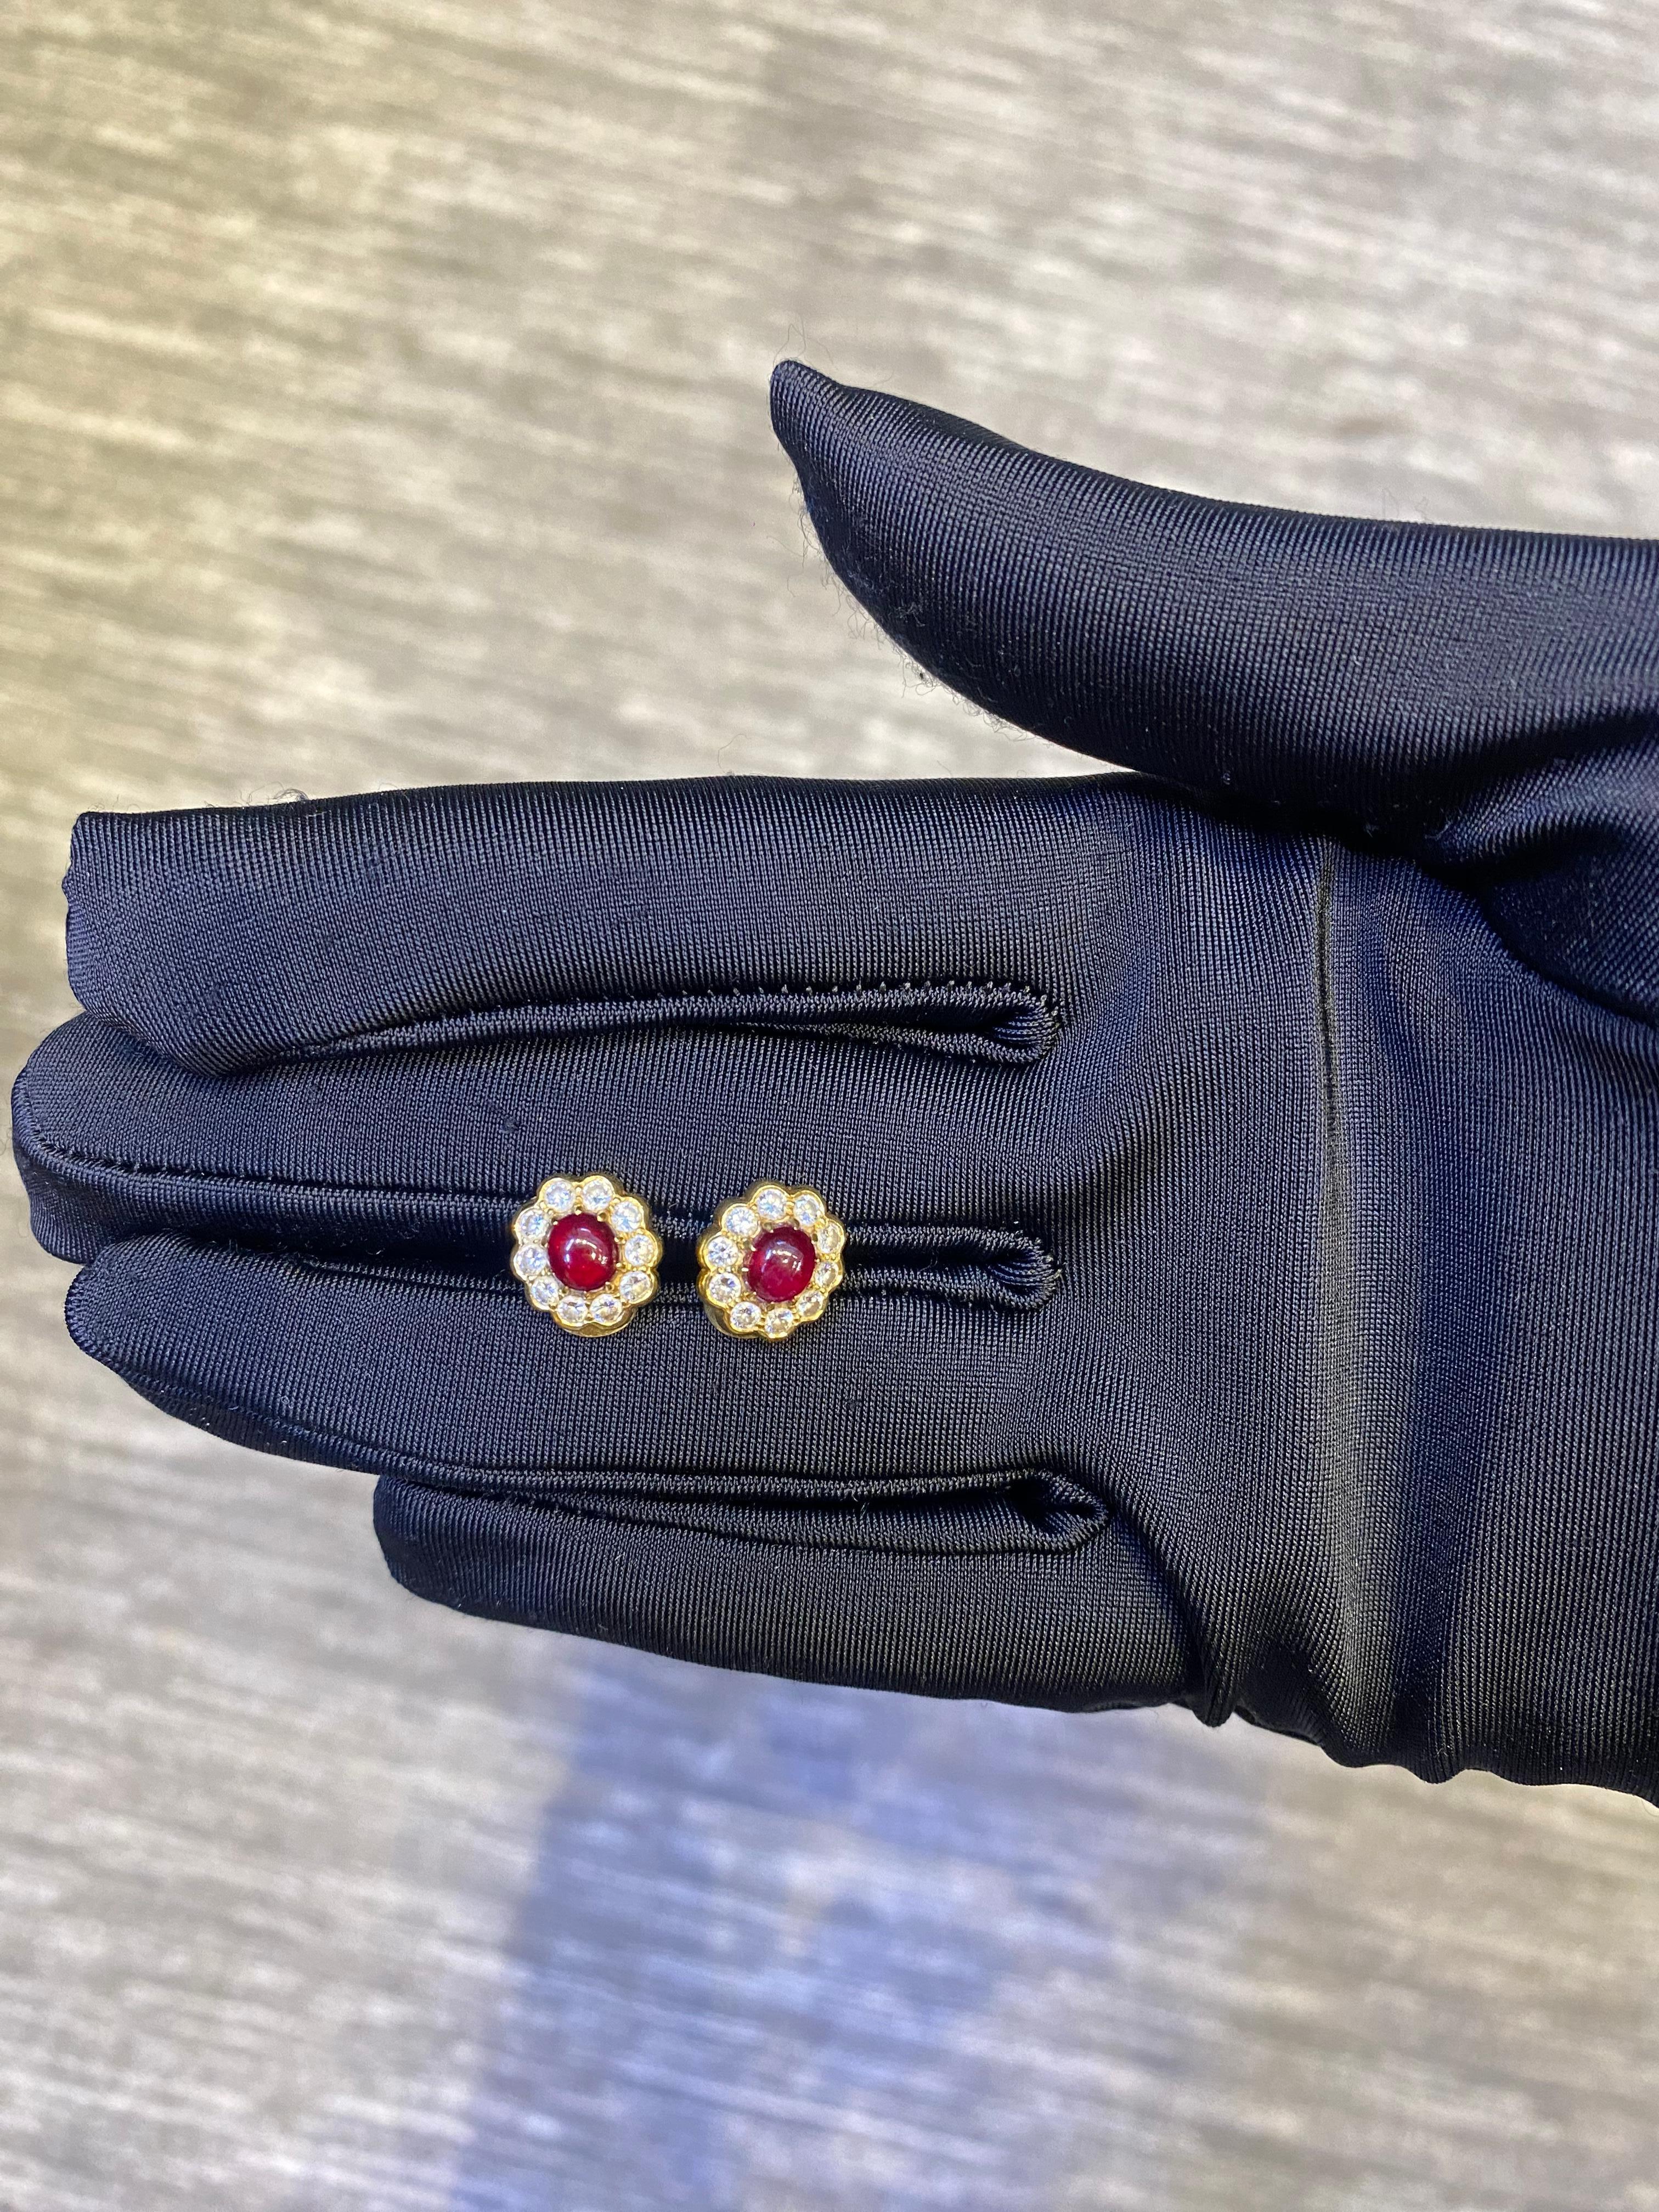 Van Cleef & Arpels Cabochon Ruby & Diamond Earrings In Excellent Condition For Sale In New York, NY